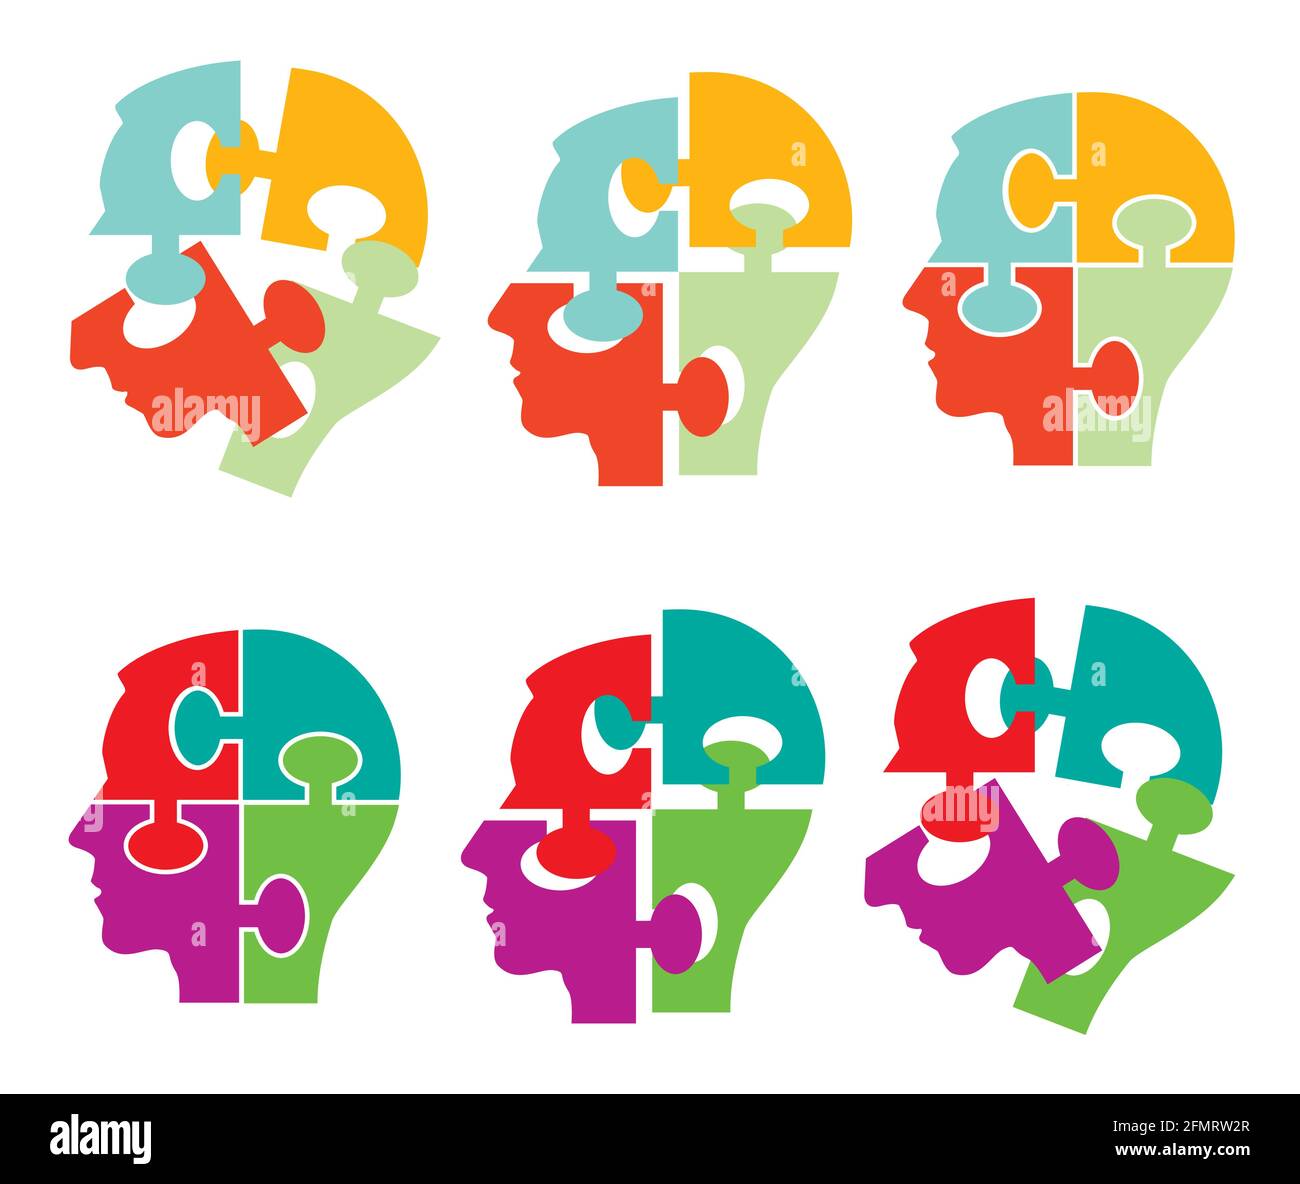 Colorful Puzzle Piece Silhouette Heads,psychology concept. Disassembled Puzzle male head silhouette symbolizing concentration, mindfulness. Stock Vector